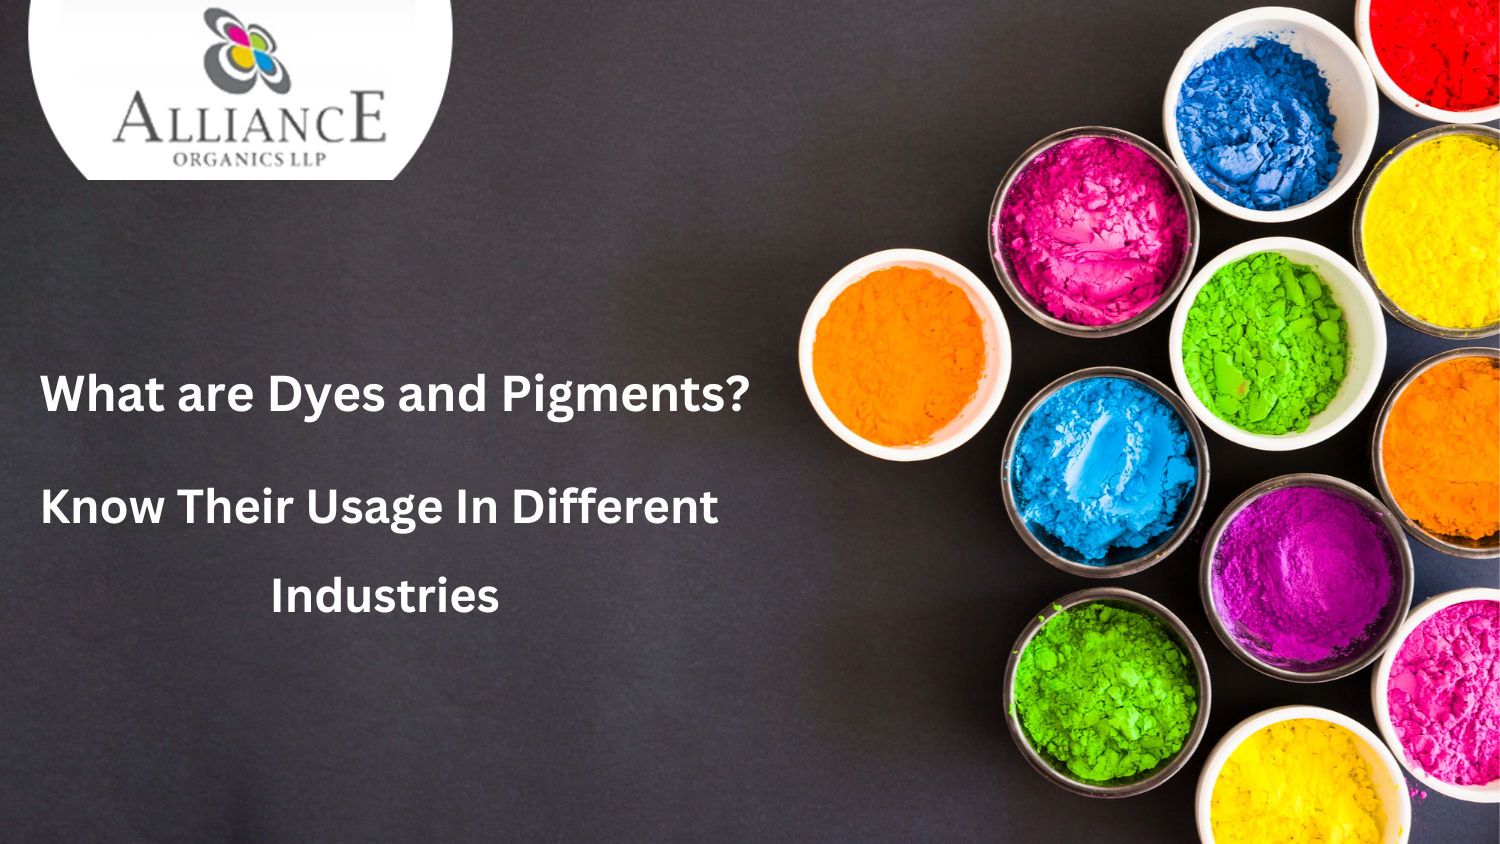 What are Dyes and Pigments